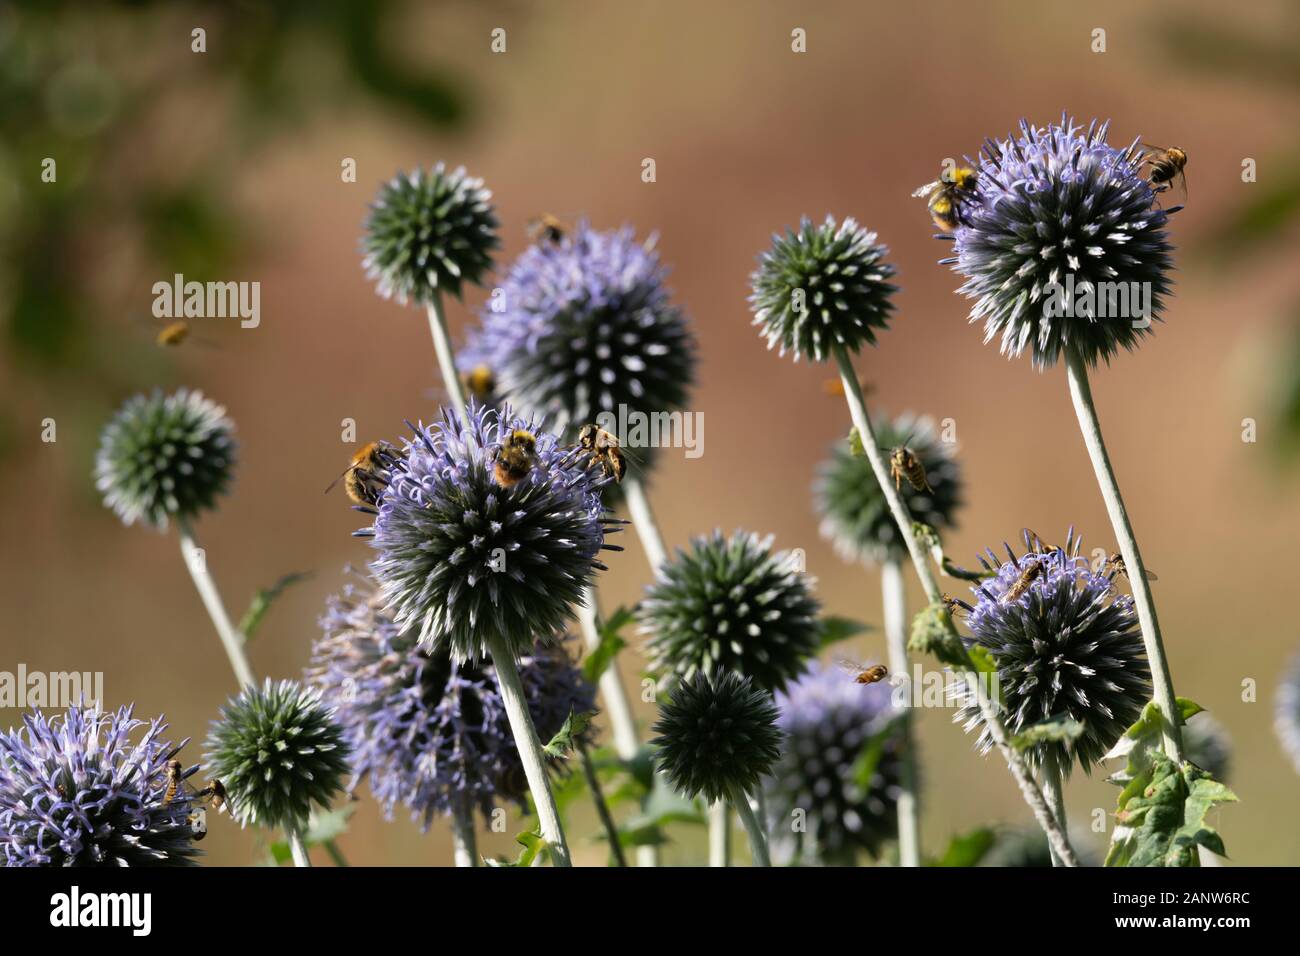 A Variety of Pollinating Insects Gather on a Globe Thistle Plant (Echinops Bannaticus) in a Garden in Aberdeenshire, Scotland Stock Photo